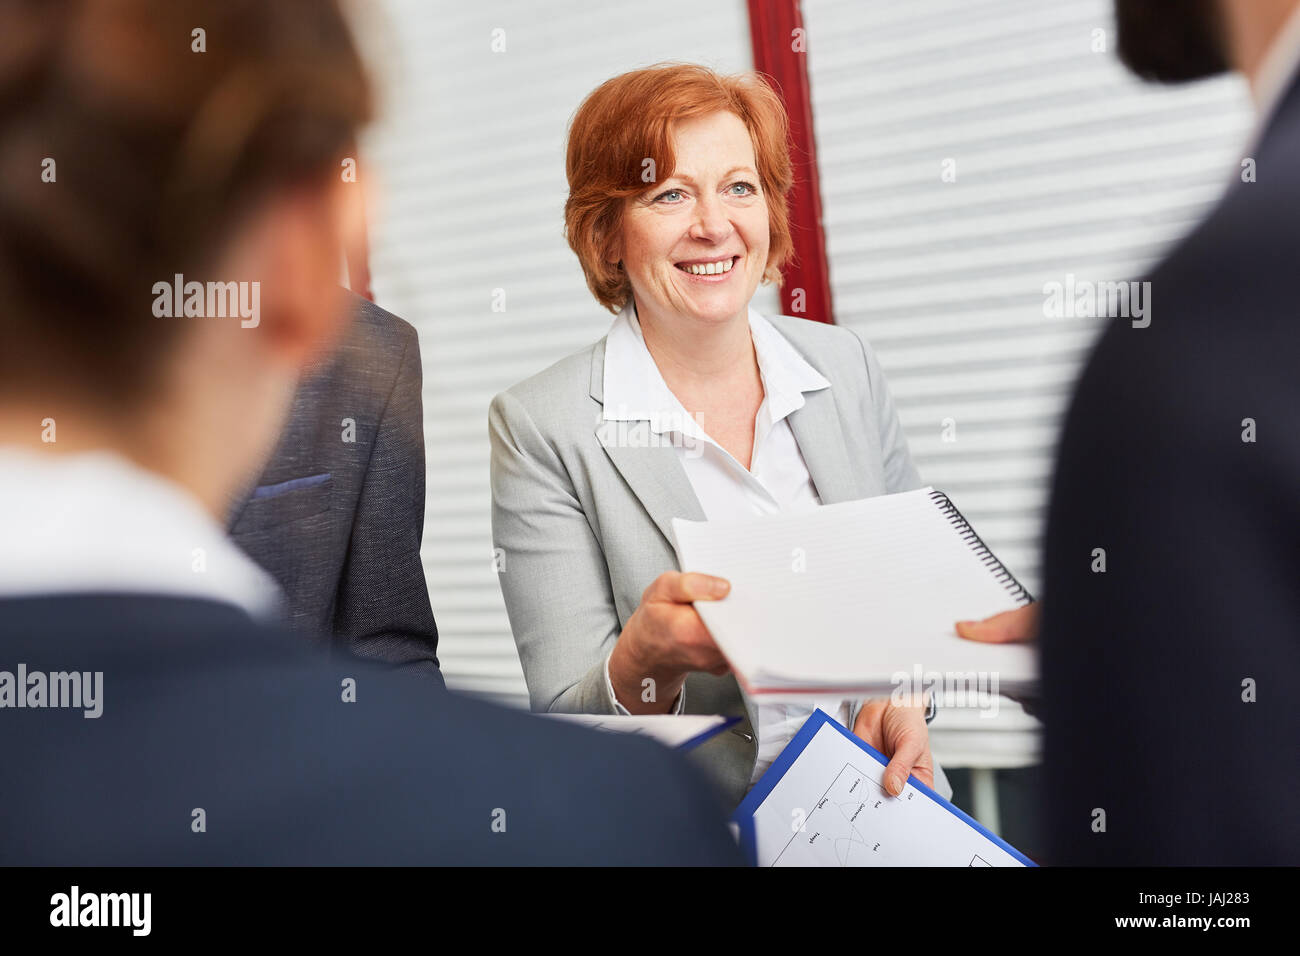 Personnel manager accepts application from candidate in assessment center Stock Photo